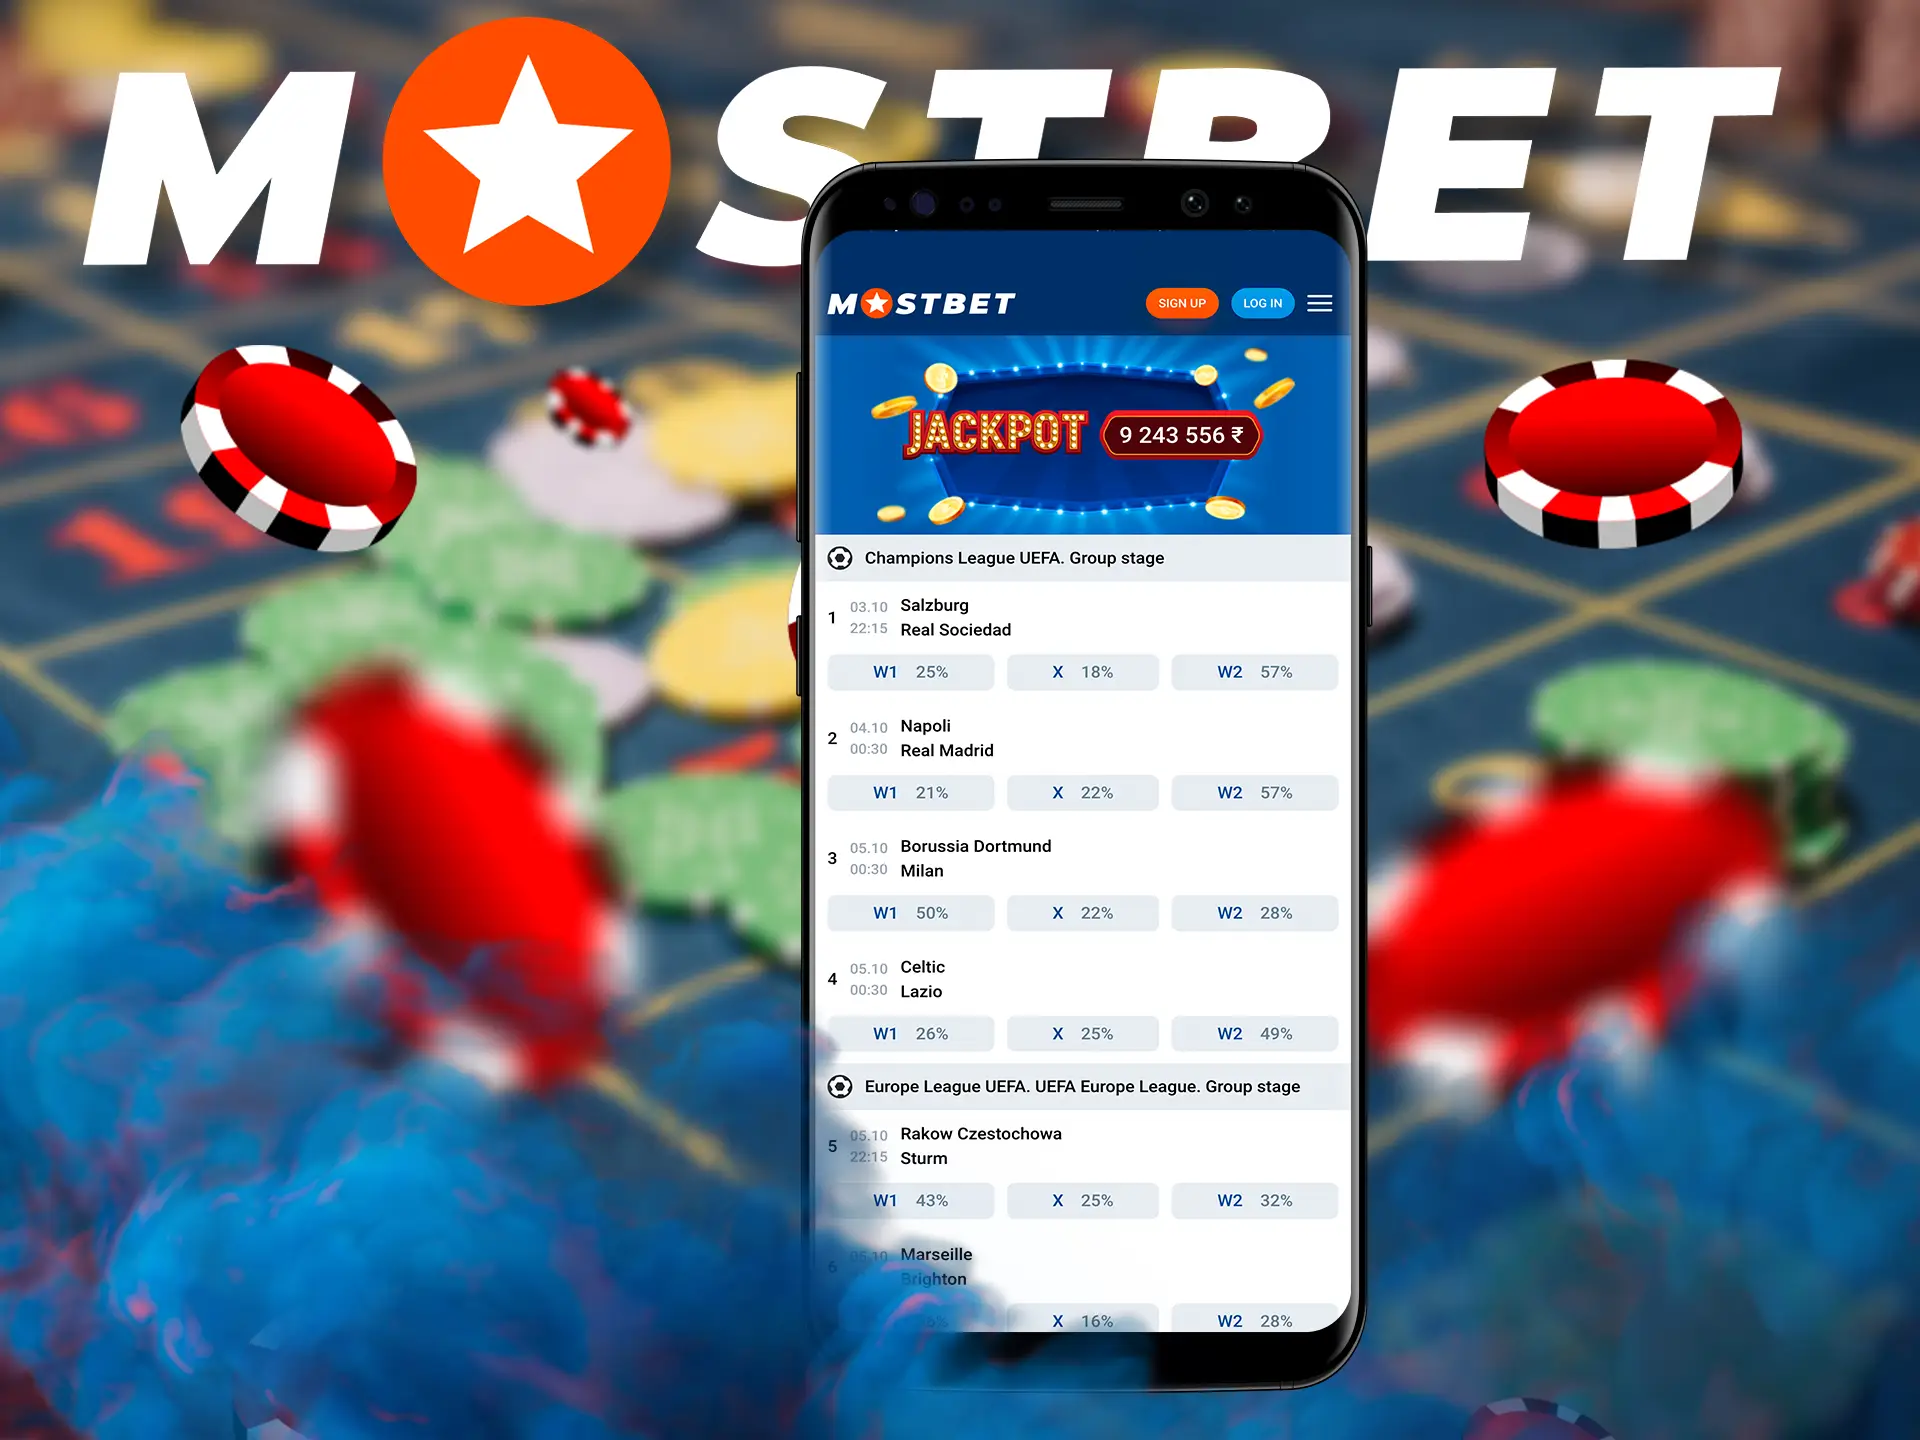 Try out Mostbet's cross-platform software, it allows you to focus on playing anywhere you like.